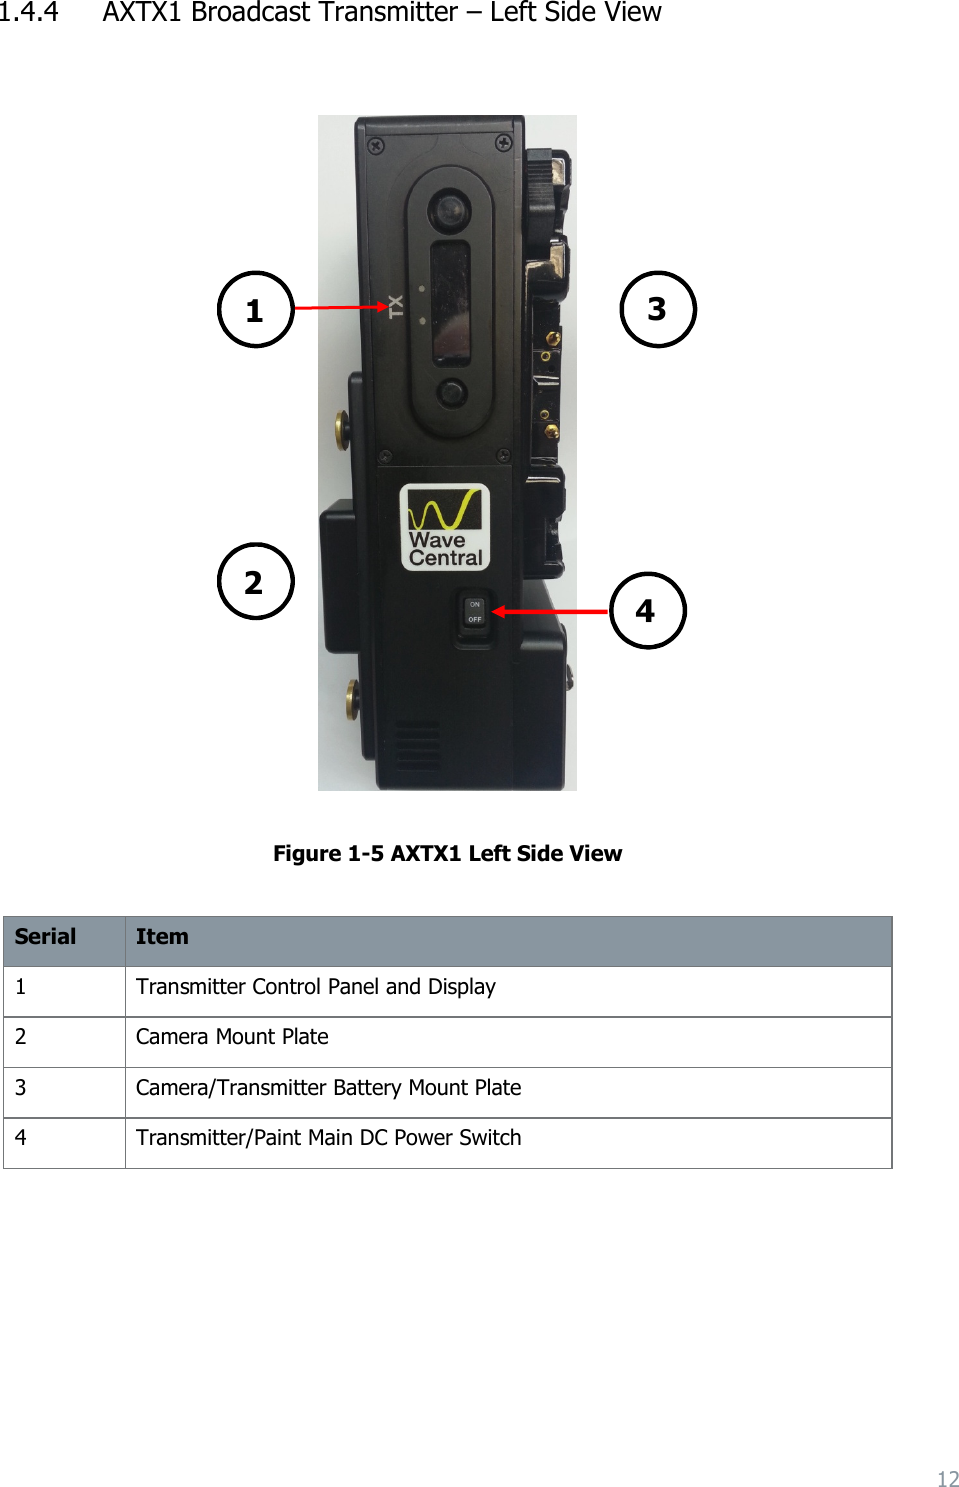 12  1.4.4 AXTX1 Broadcast Transmitter – Left Side View     Figure 1-5 AXTX1 Left Side View  Serial Item 1 Transmitter Control Panel and Display 2 Camera Mount Plate 3 Camera/Transmitter Battery Mount Plate 4 Transmitter/Paint Main DC Power Switch        1 3 4 2 